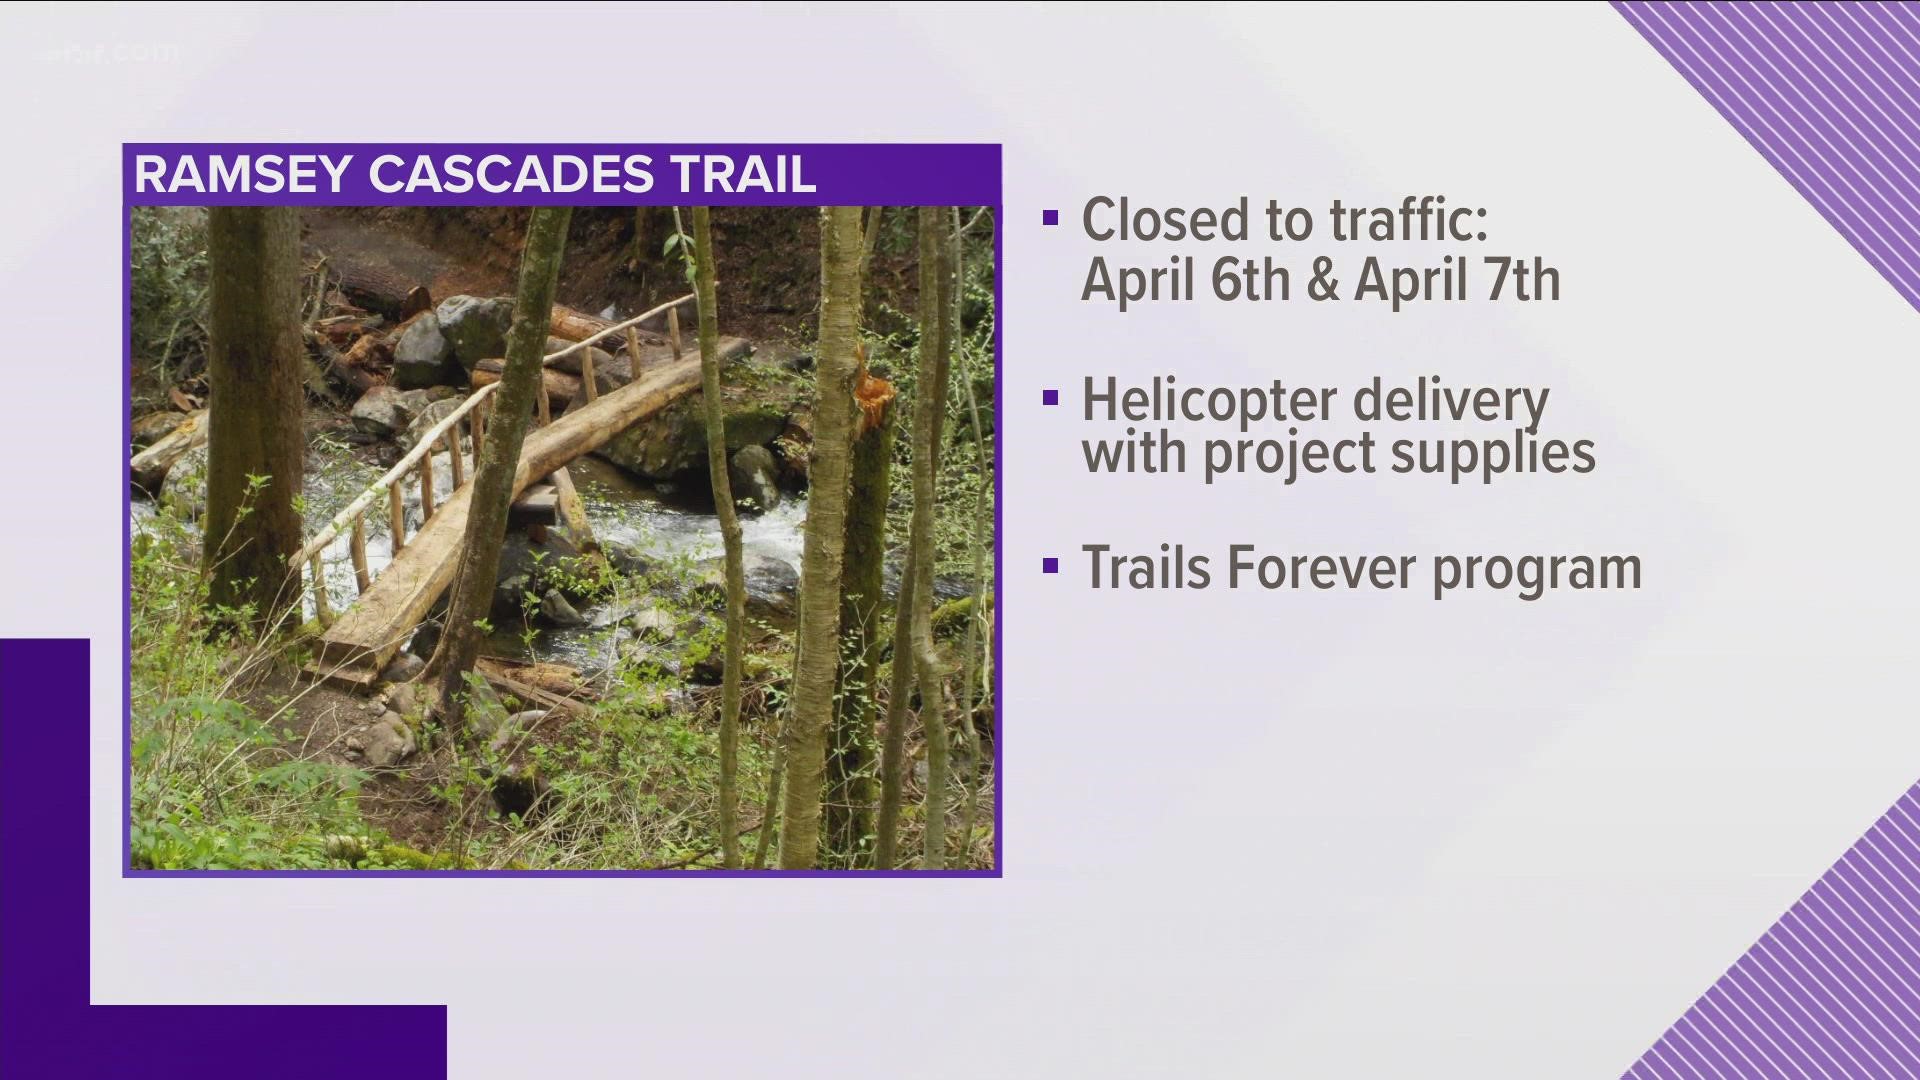 The National Park Service said Monday it planned major work to the Ramsey Cascades Trail.